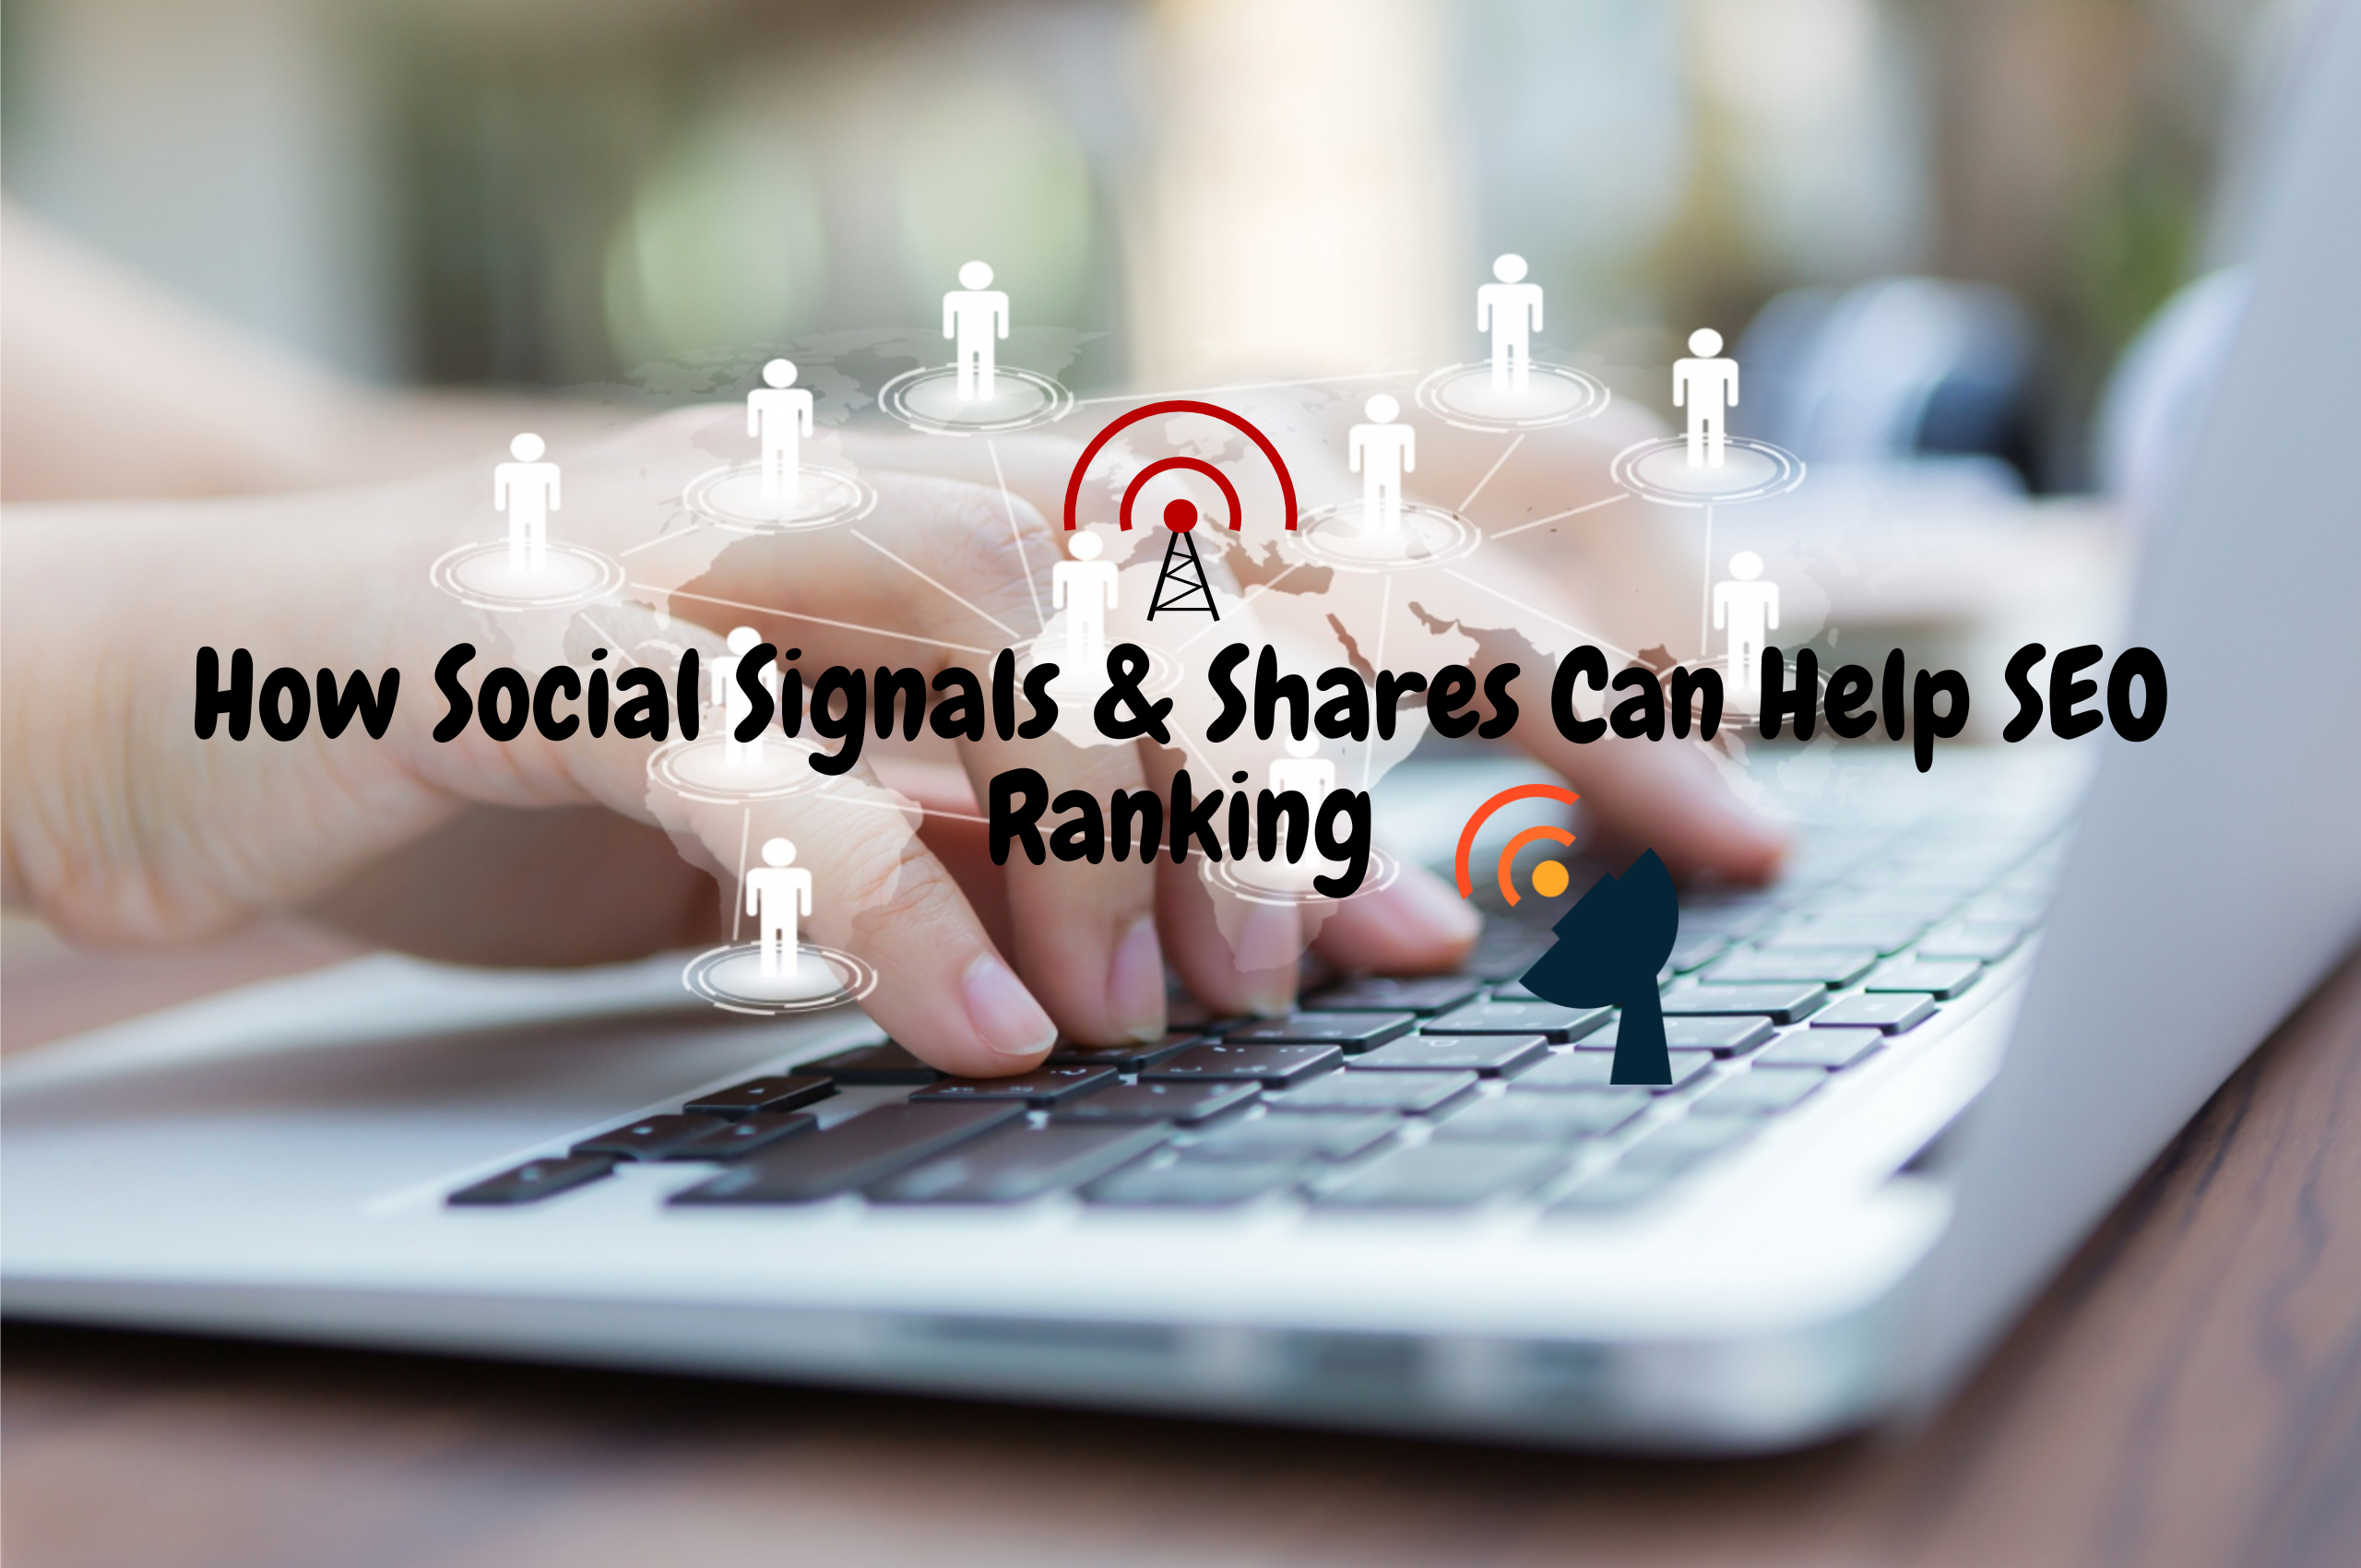 How Social Signals & Shares Can Help SEO Ranking